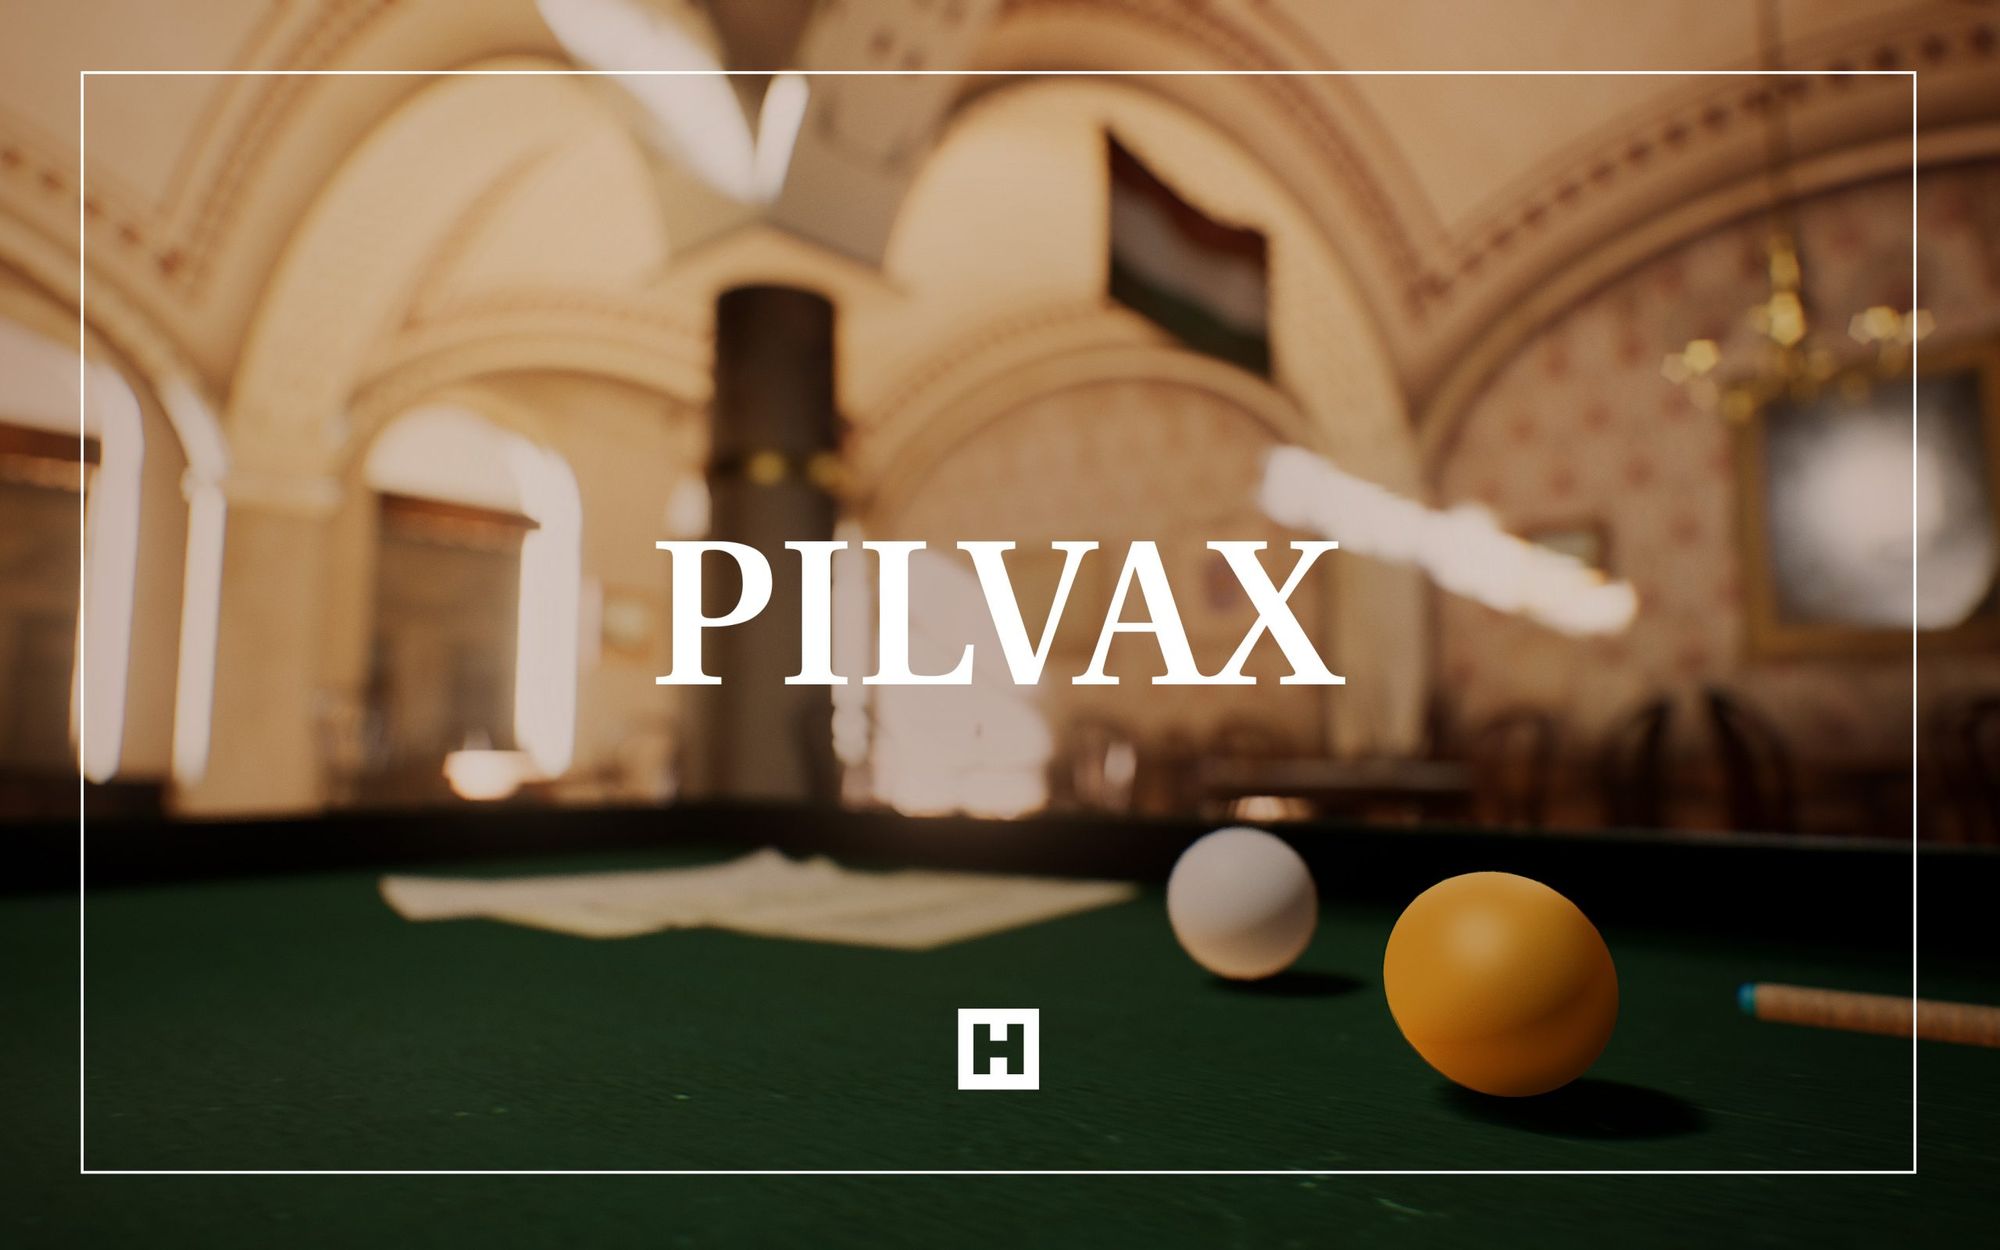 Pilvax Café—like you've never seen before